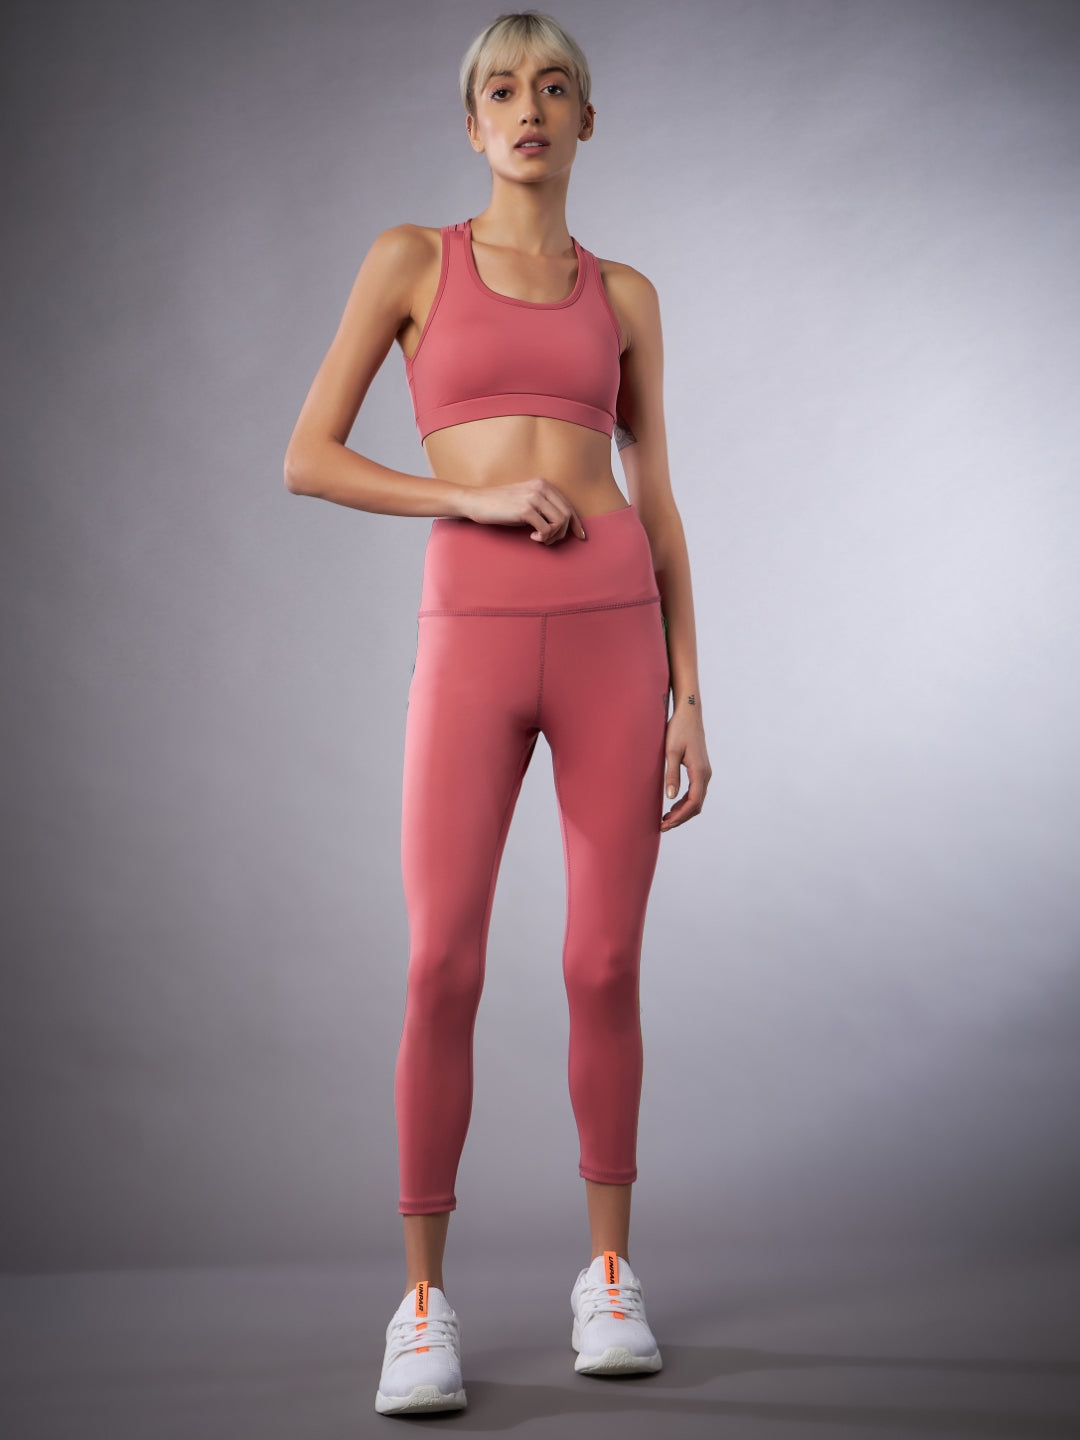 Women's Solid Coral Sports Bra